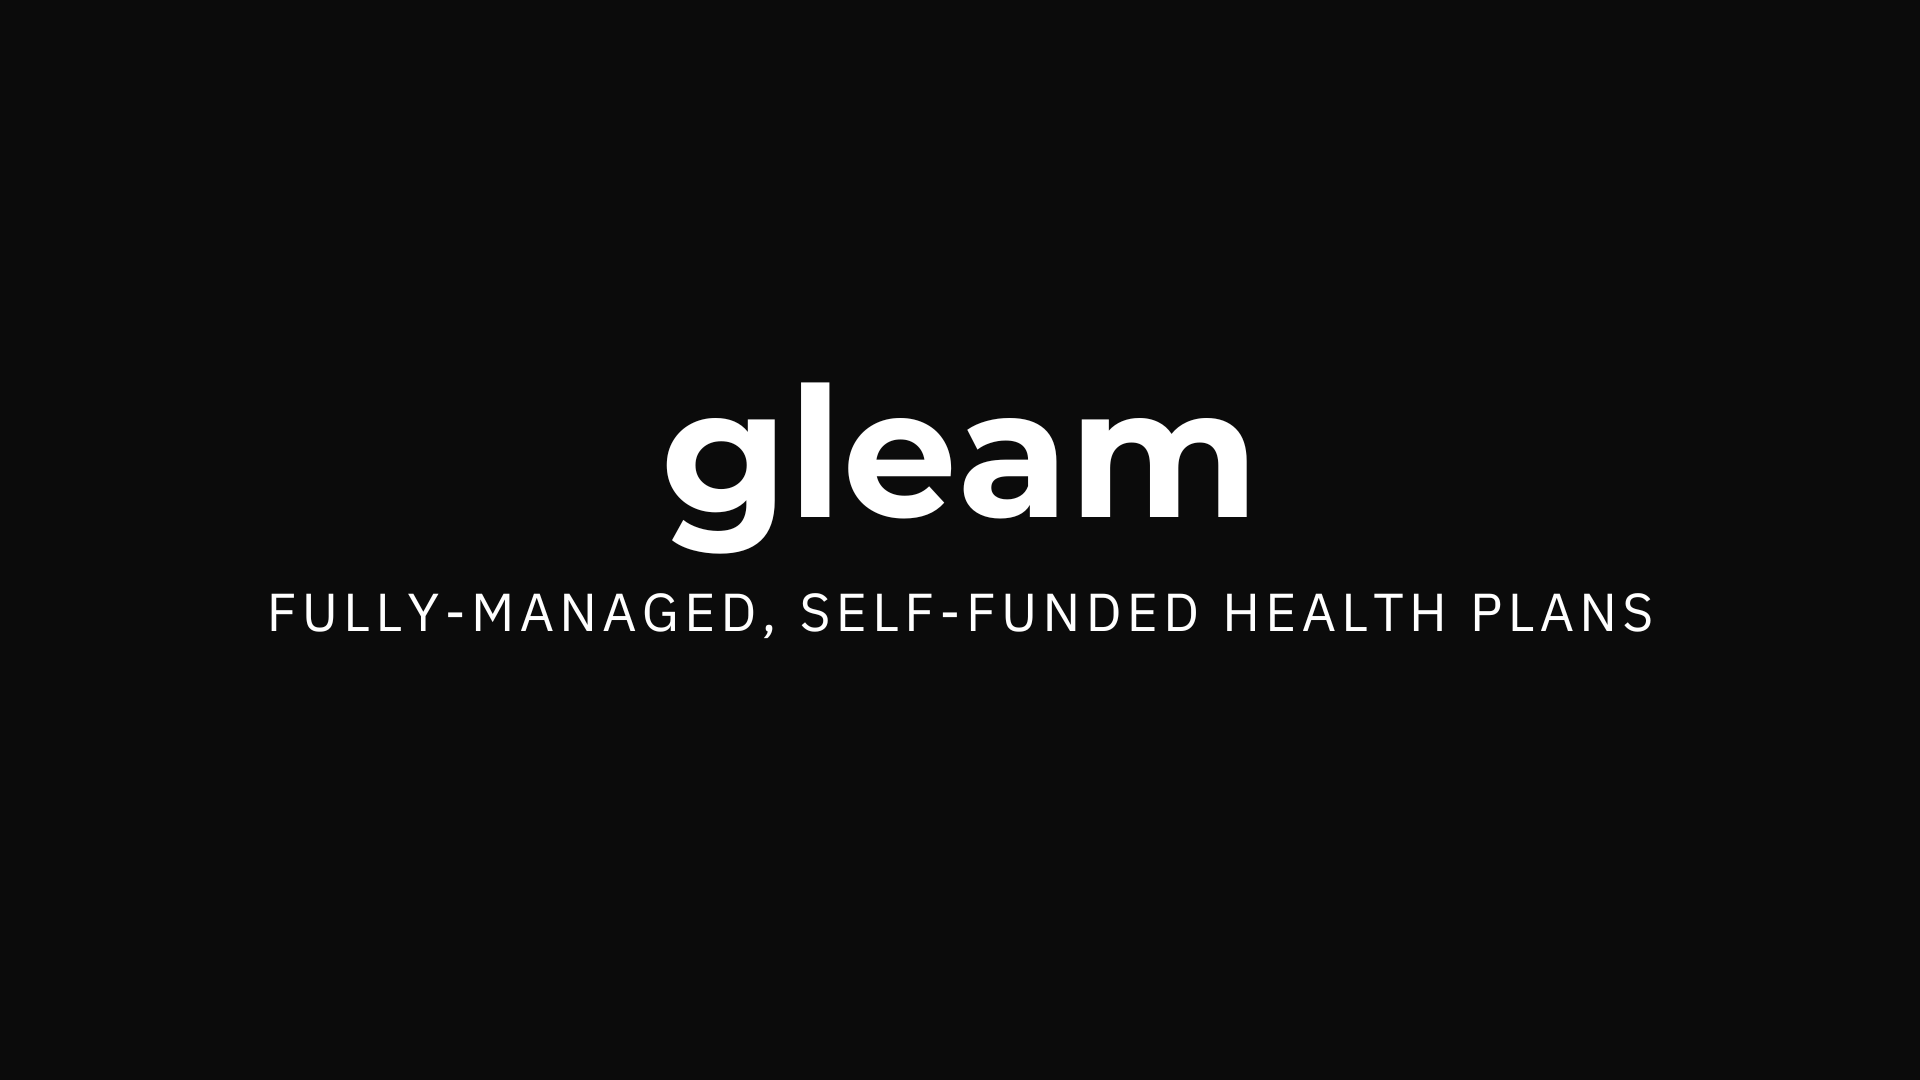 Gleam - Easily set up and administer self-funded health plans